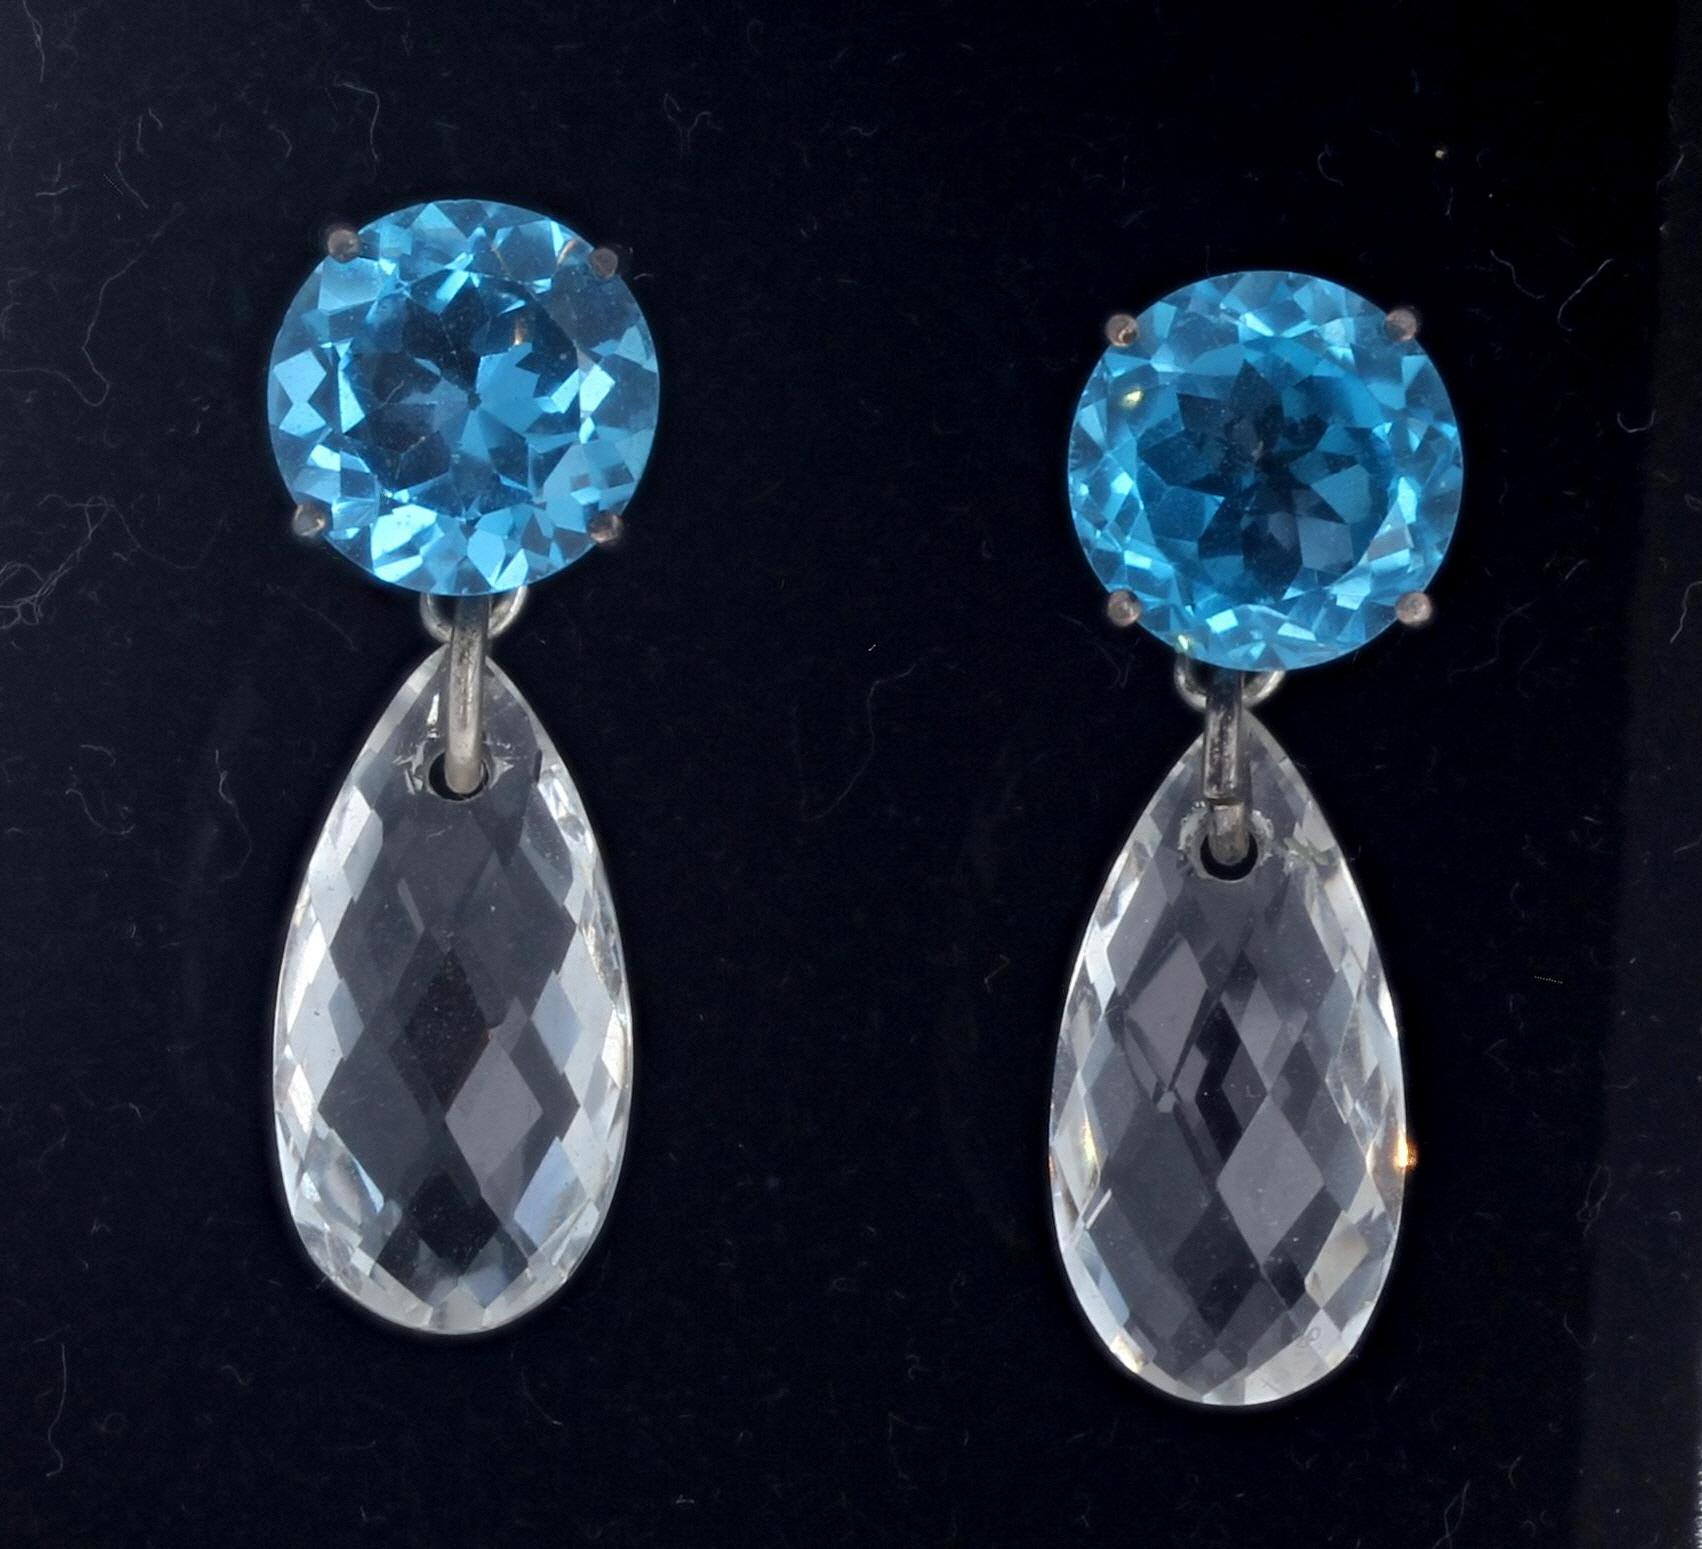 These intensely big Blue Topaz (11.5 carats total) - 11 mm - dangle the brilliant gem cut Clear Translucent Topaz - 19mm x 10mm - in these wonderful fun stud earrings.  They are set in sterling silver.  